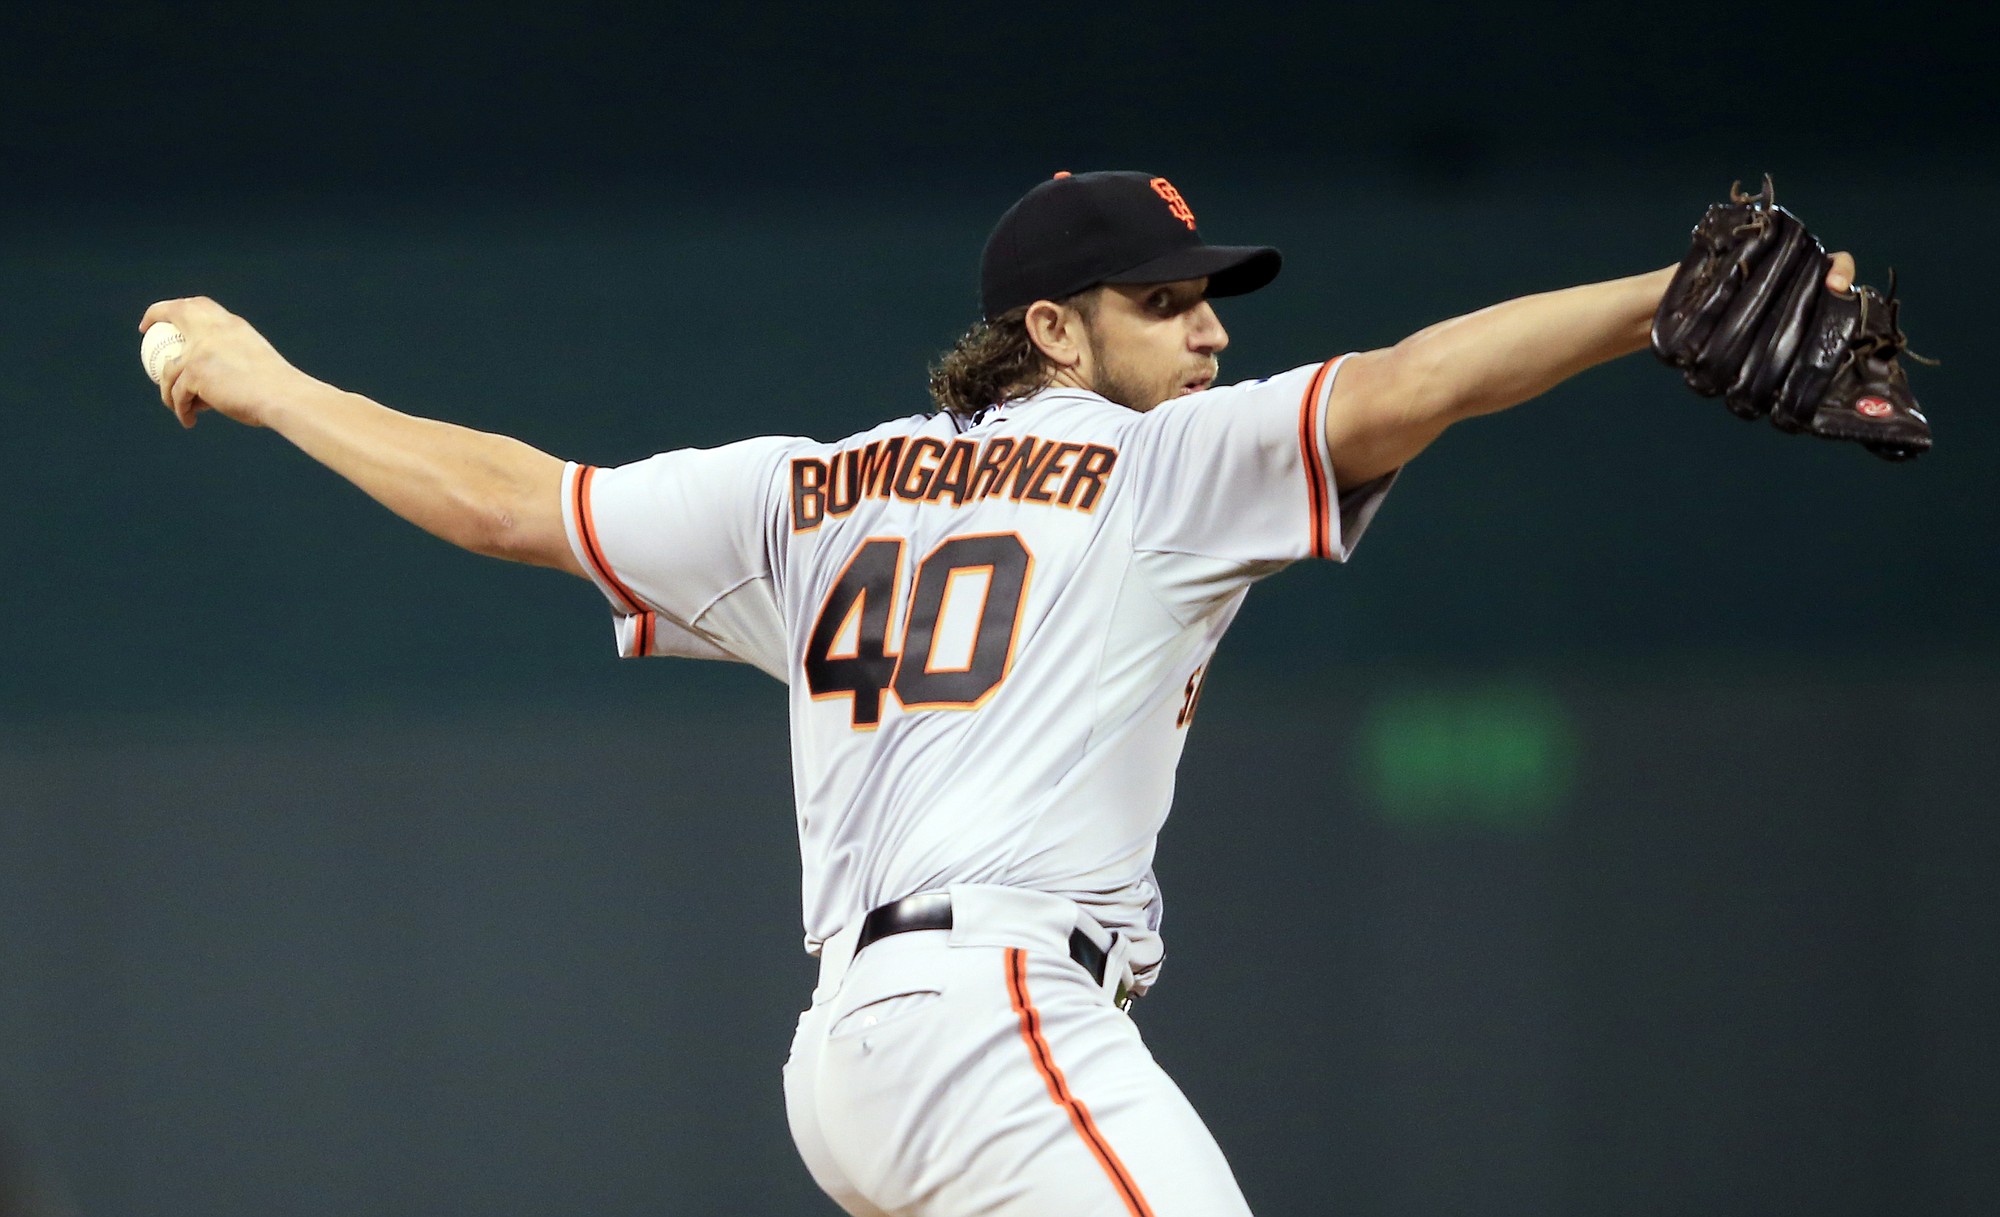 San Francisco Giants pitcher Madison Bumgarner held the Kansas City Royals to four hits over seven inning Tuesday, Oct. 21, 2014, as the Giants won game 1 of the World Series 7-1.